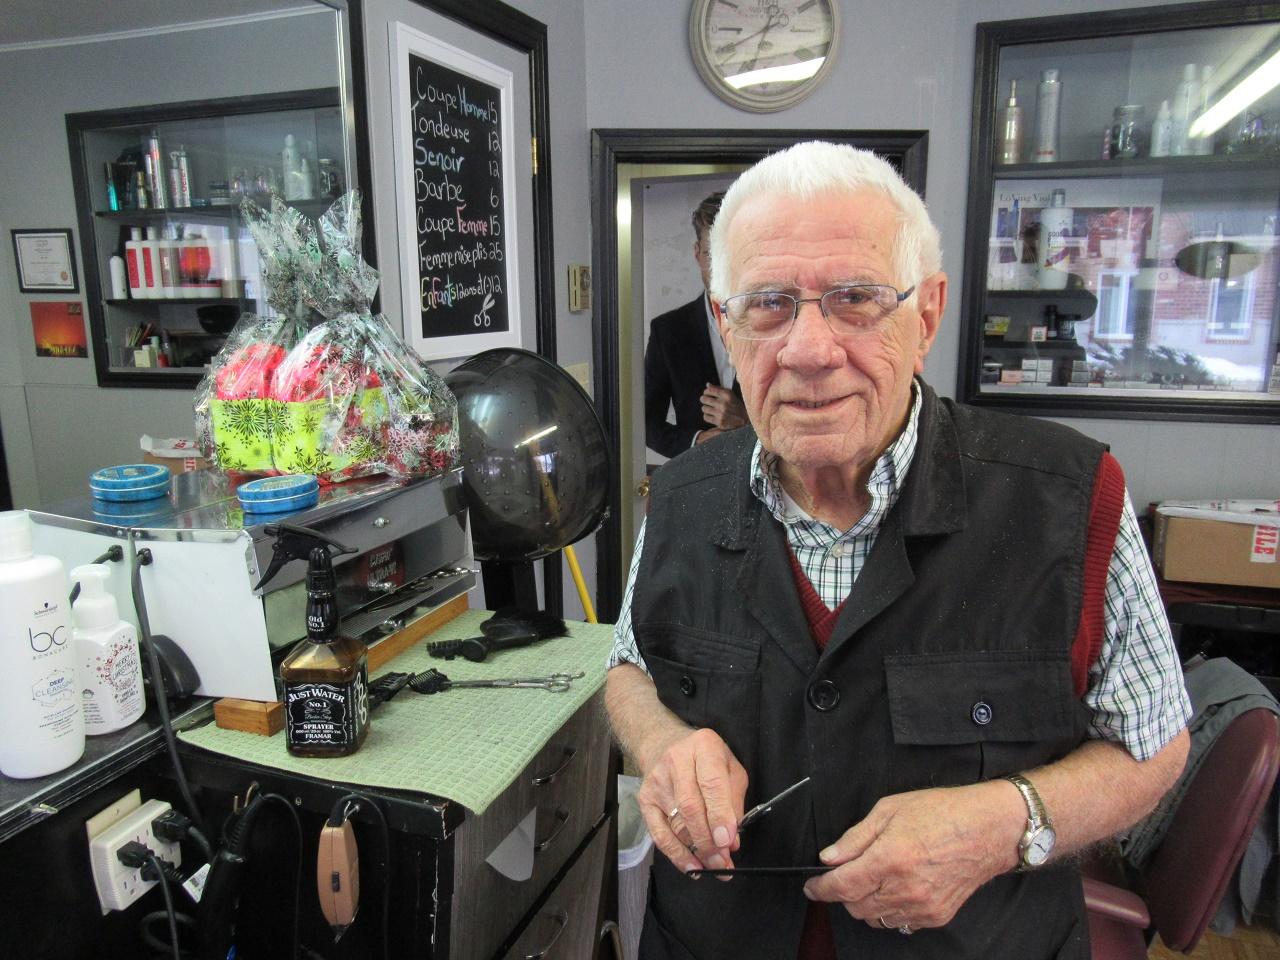 Grenville barber has been cutting hair for 65 years